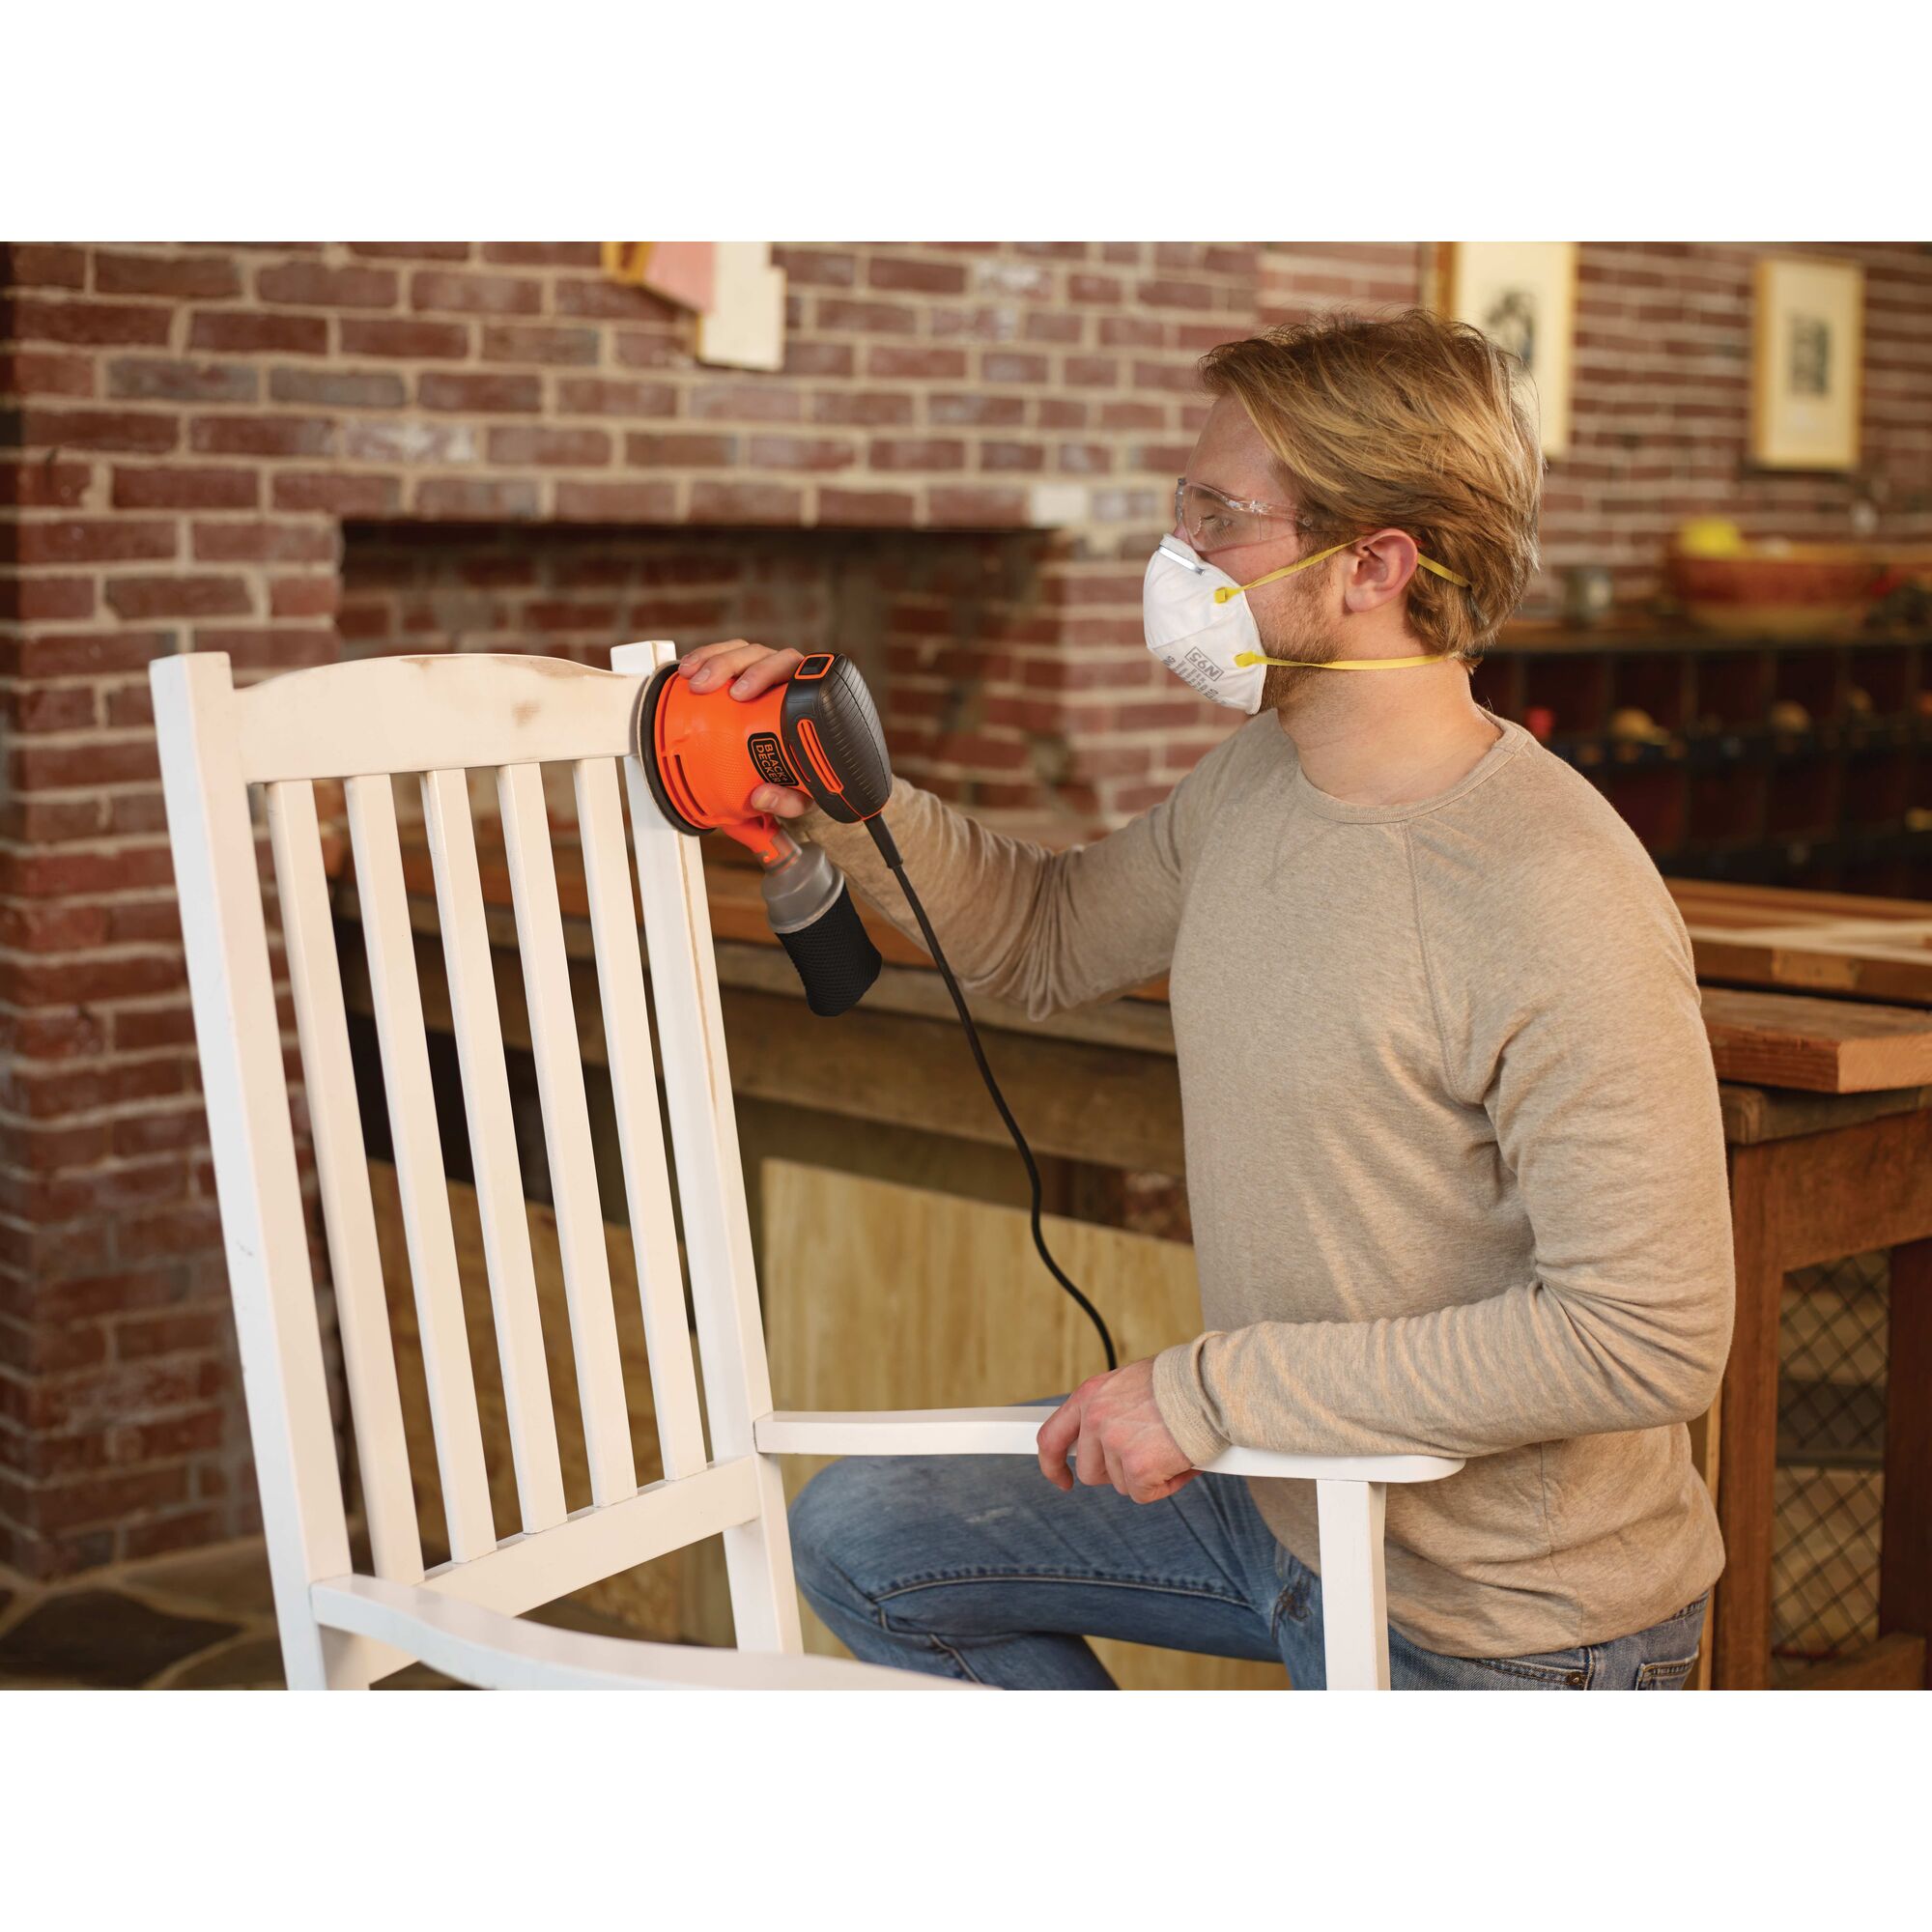 5 inch Random Orbital Sander being used to sand white finish off of a wooden rocking chair